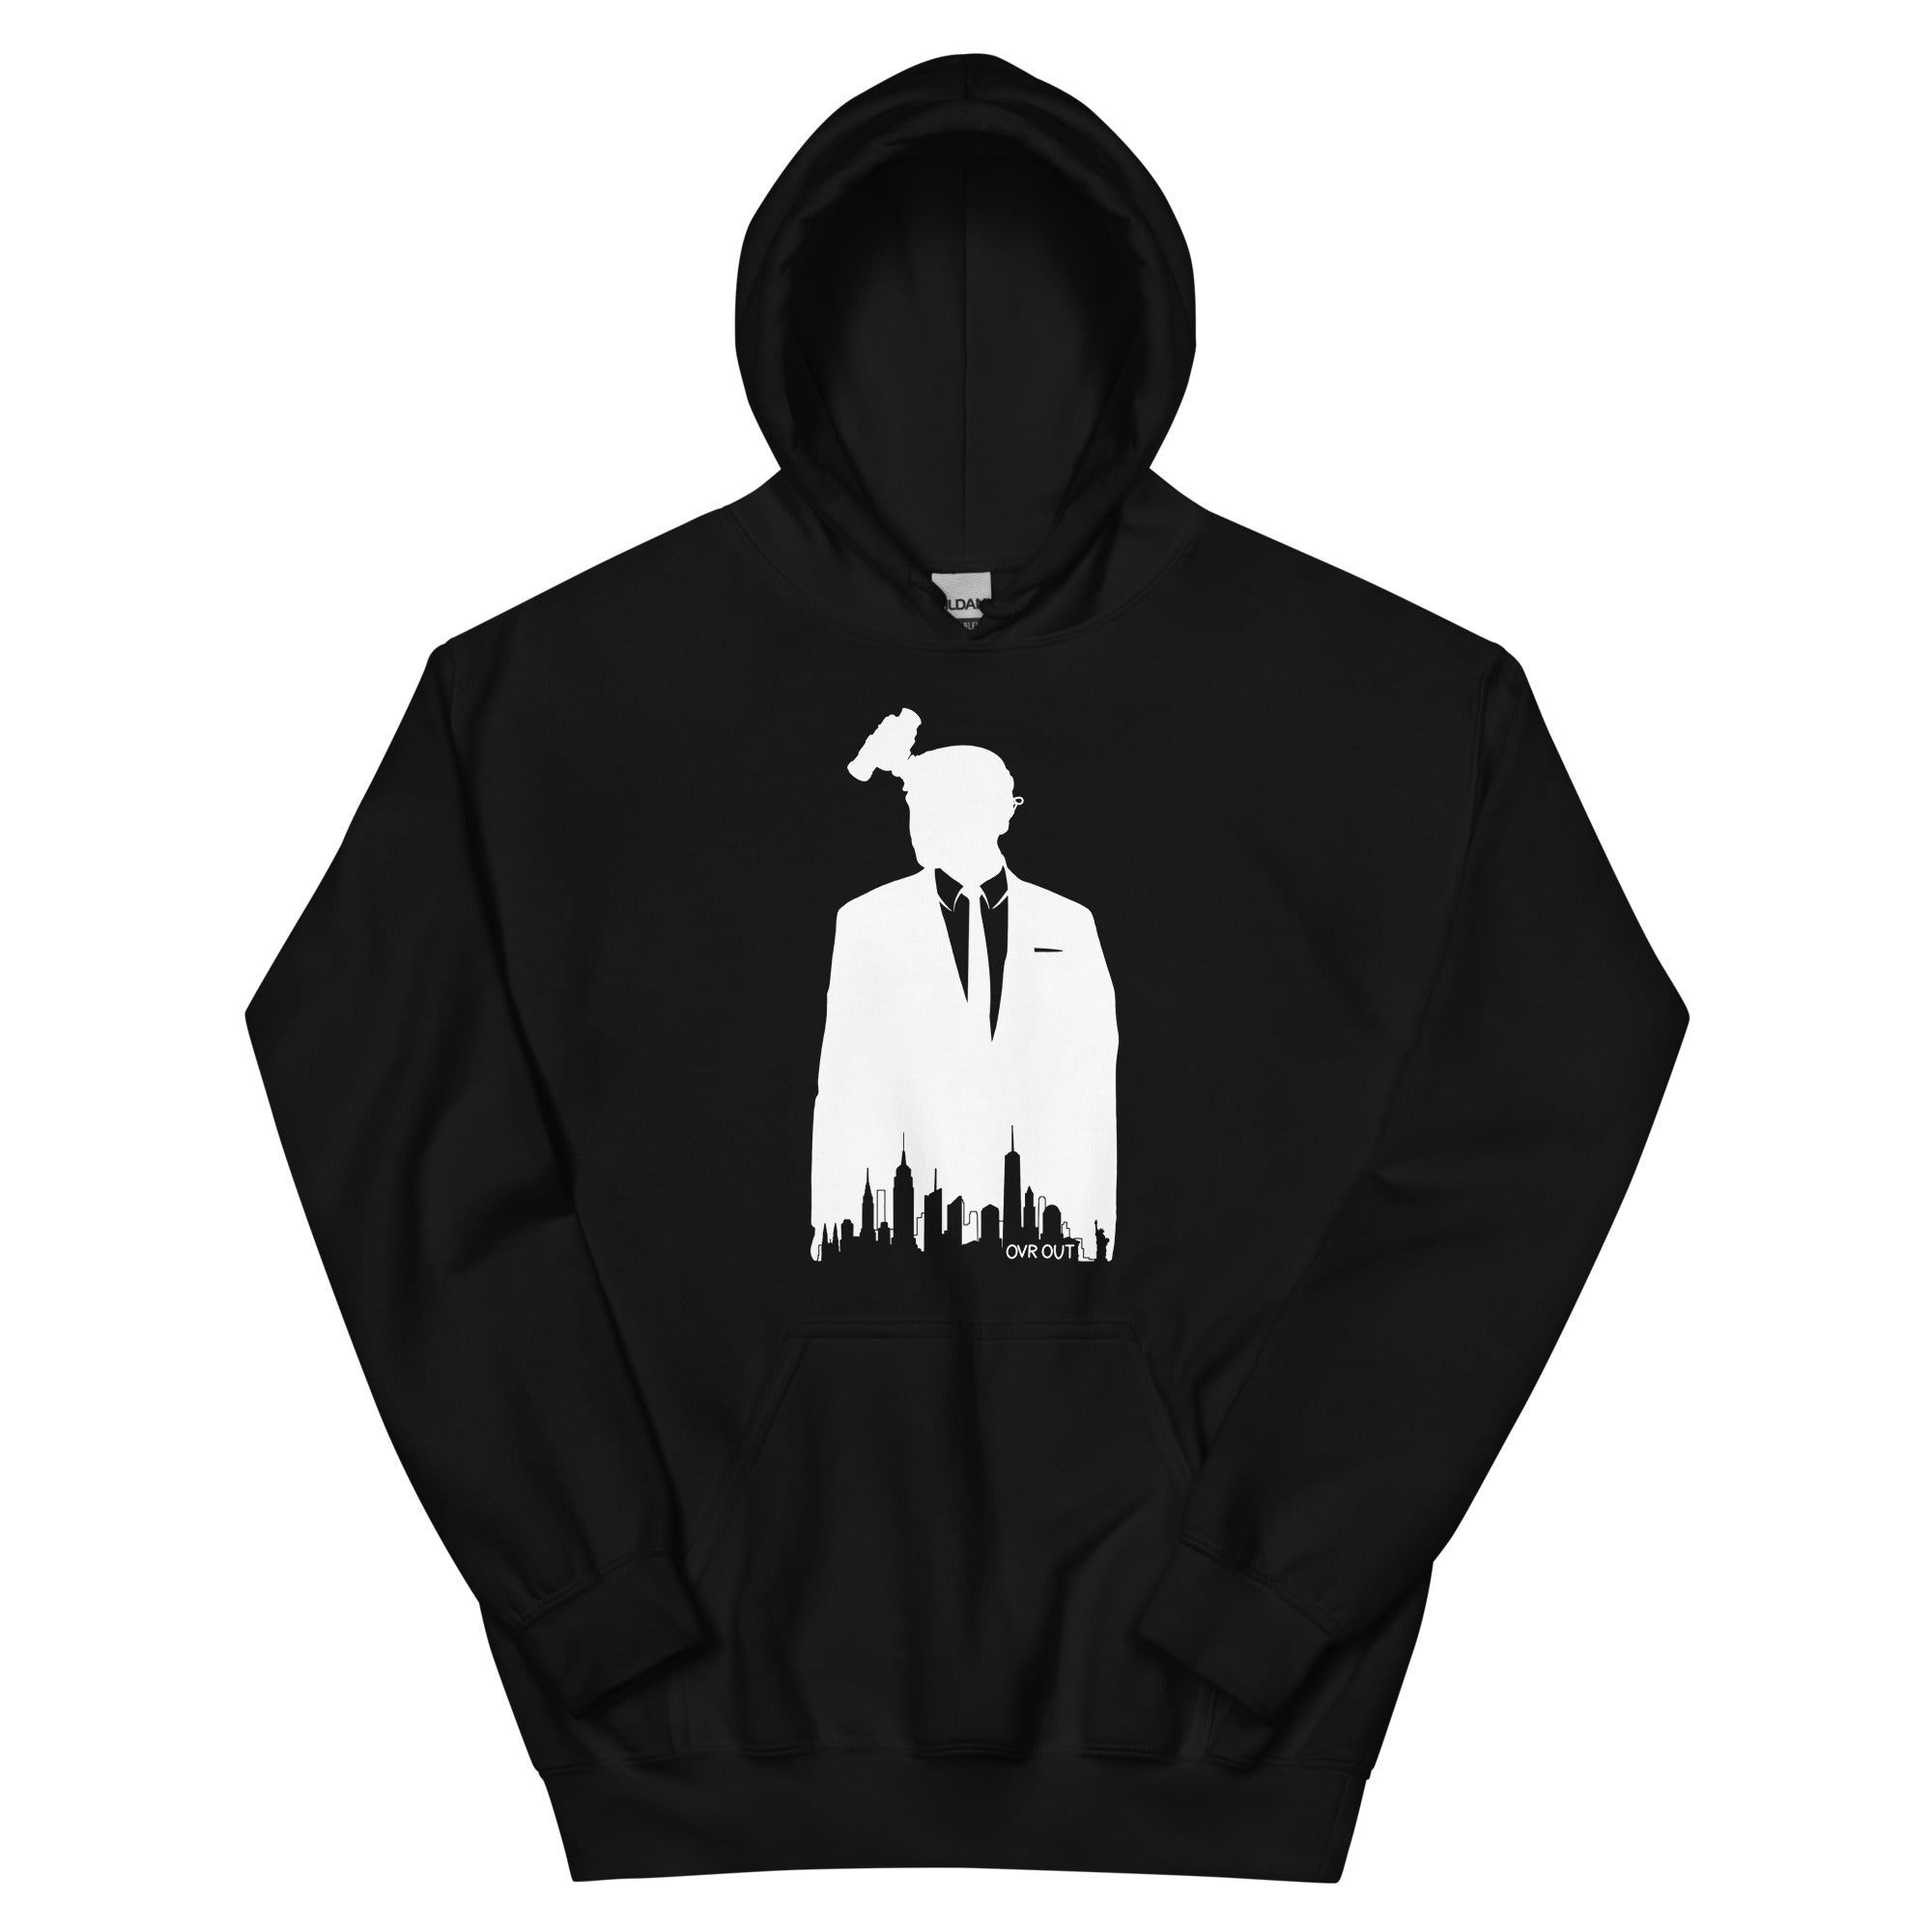 The New You Hoodie - OVR & OUT